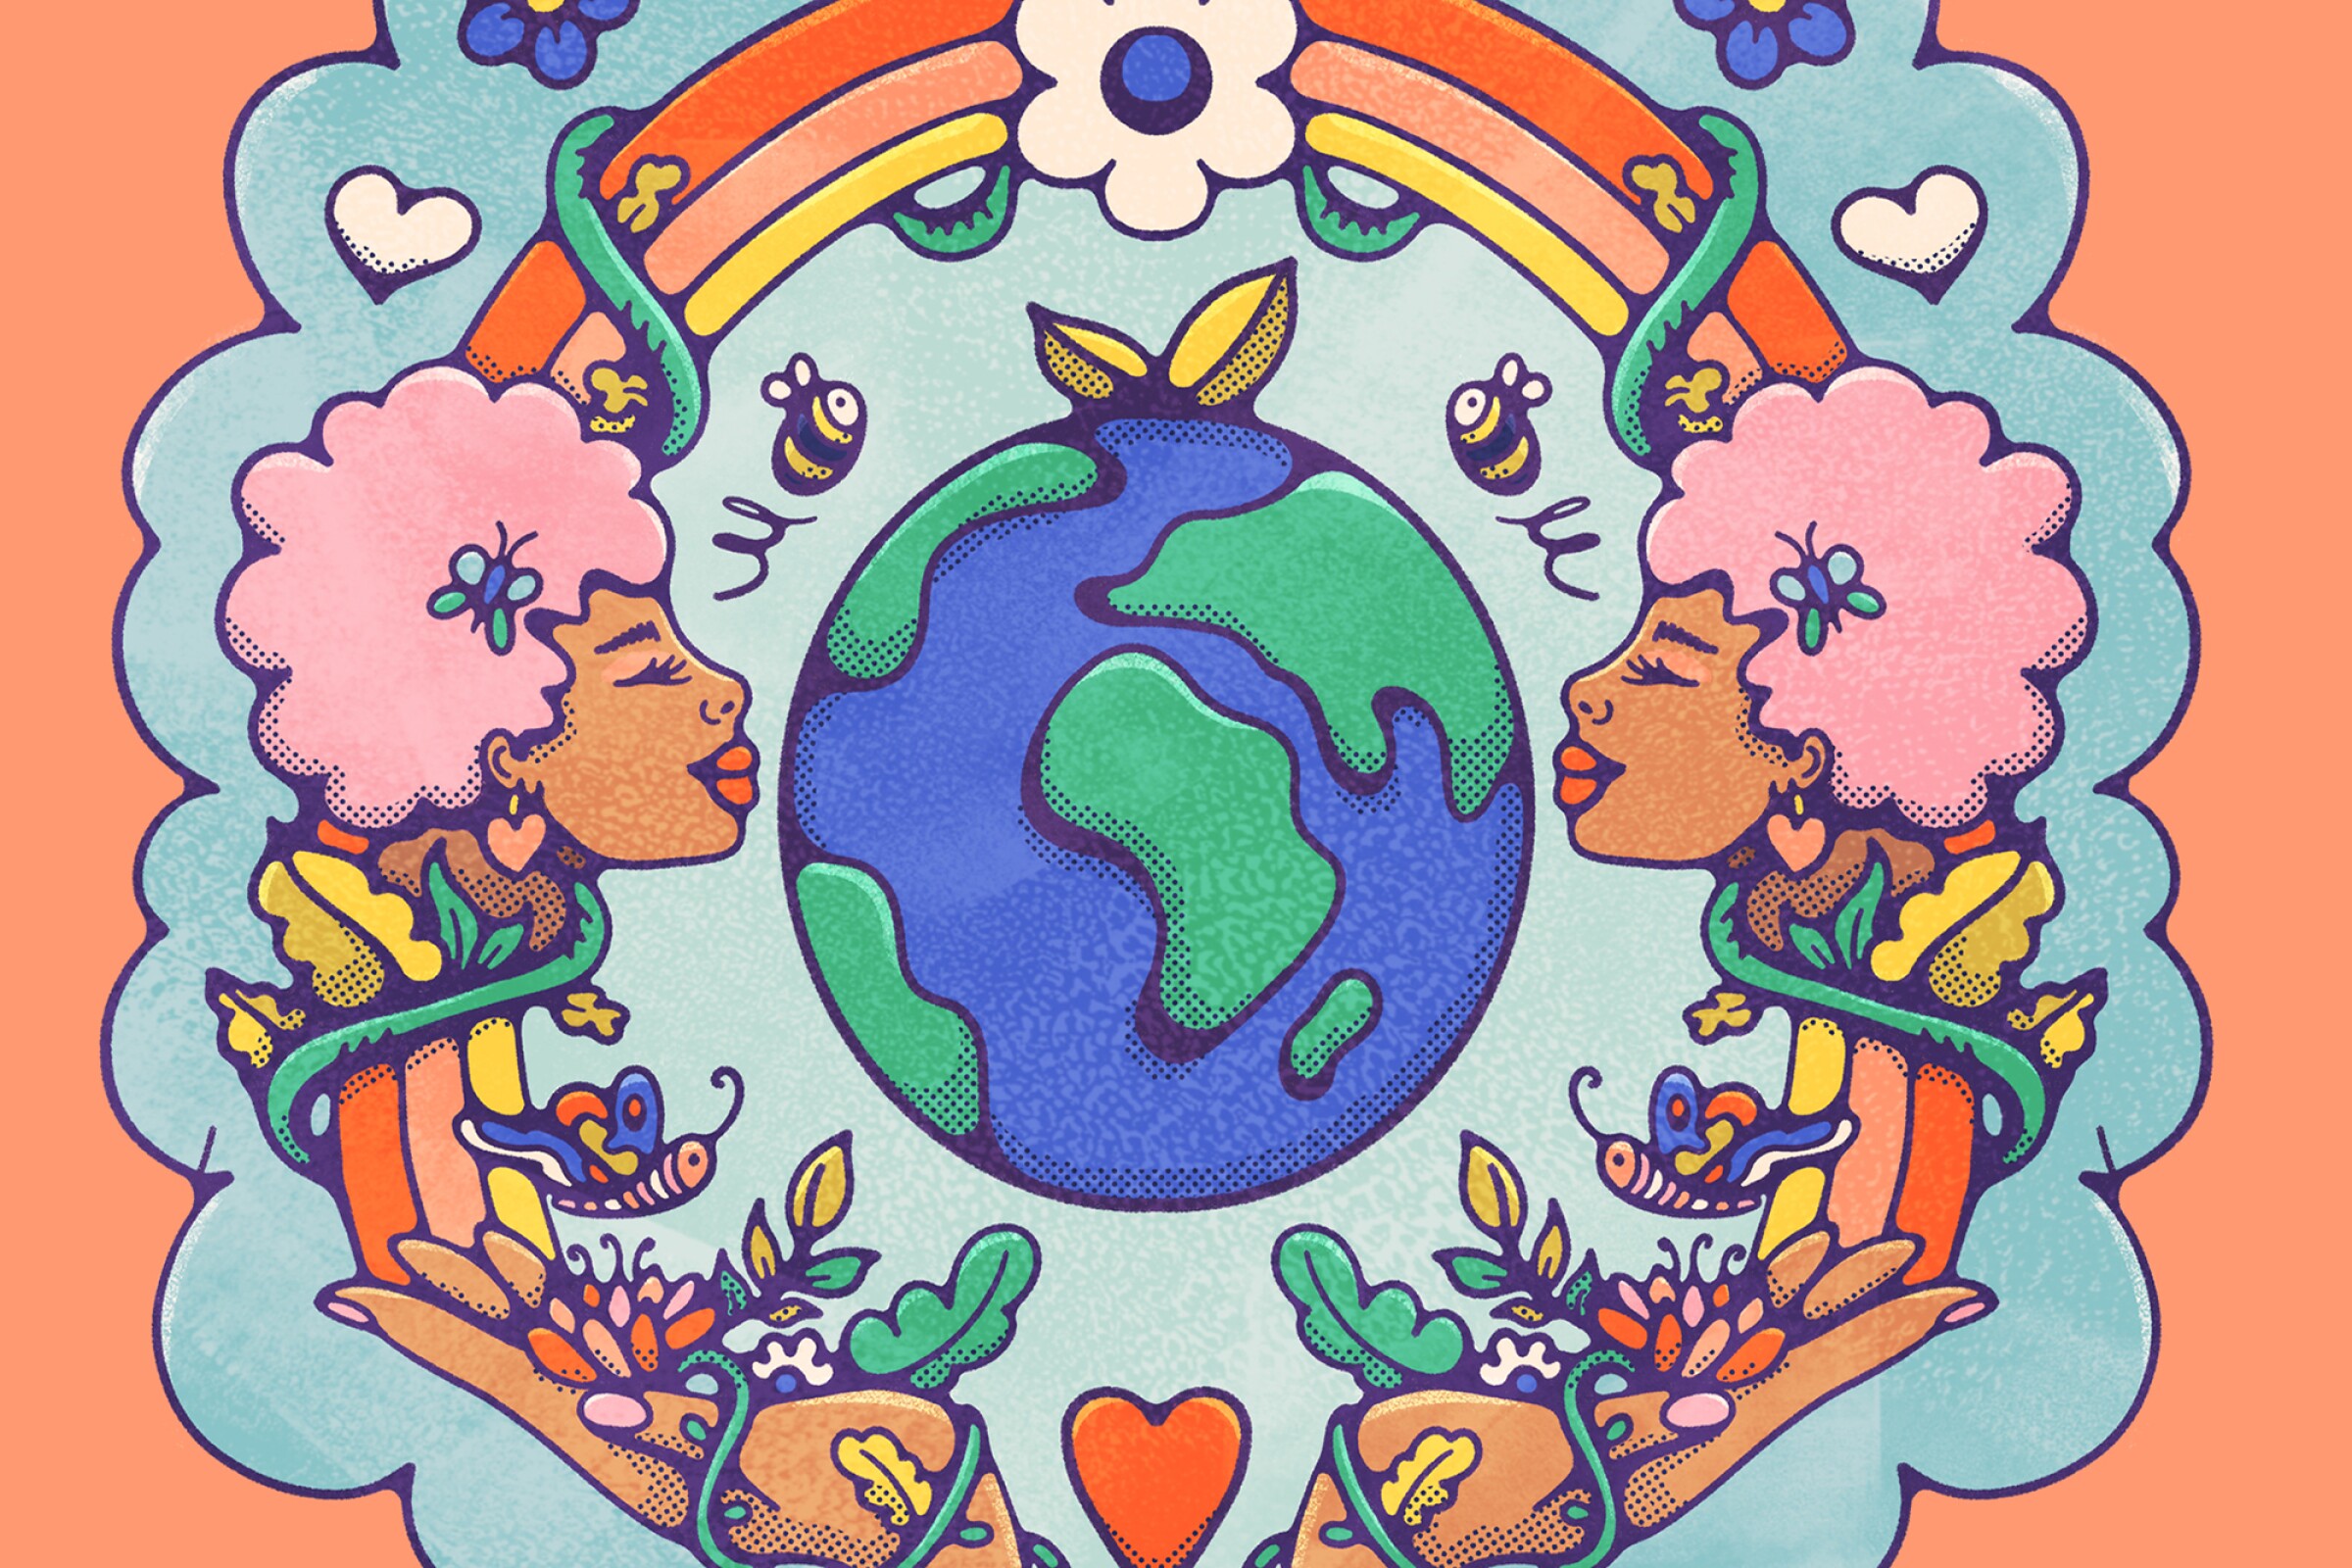 Illustration of faces, entwined with plant-life, looking at a globe in unity.